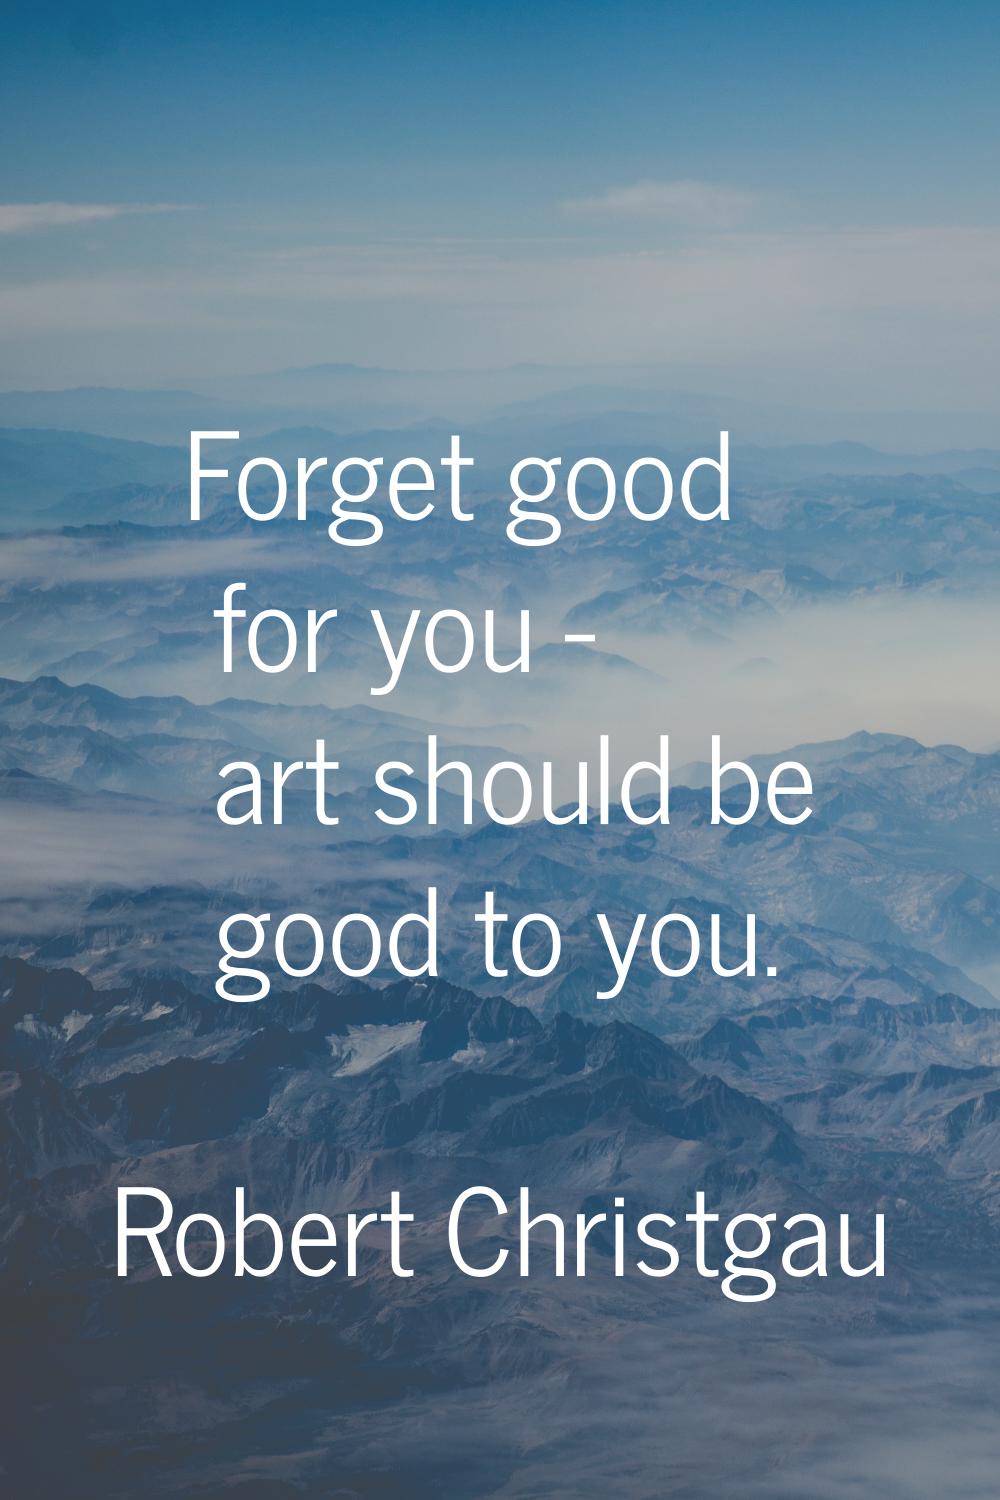 Forget good for you - art should be good to you.